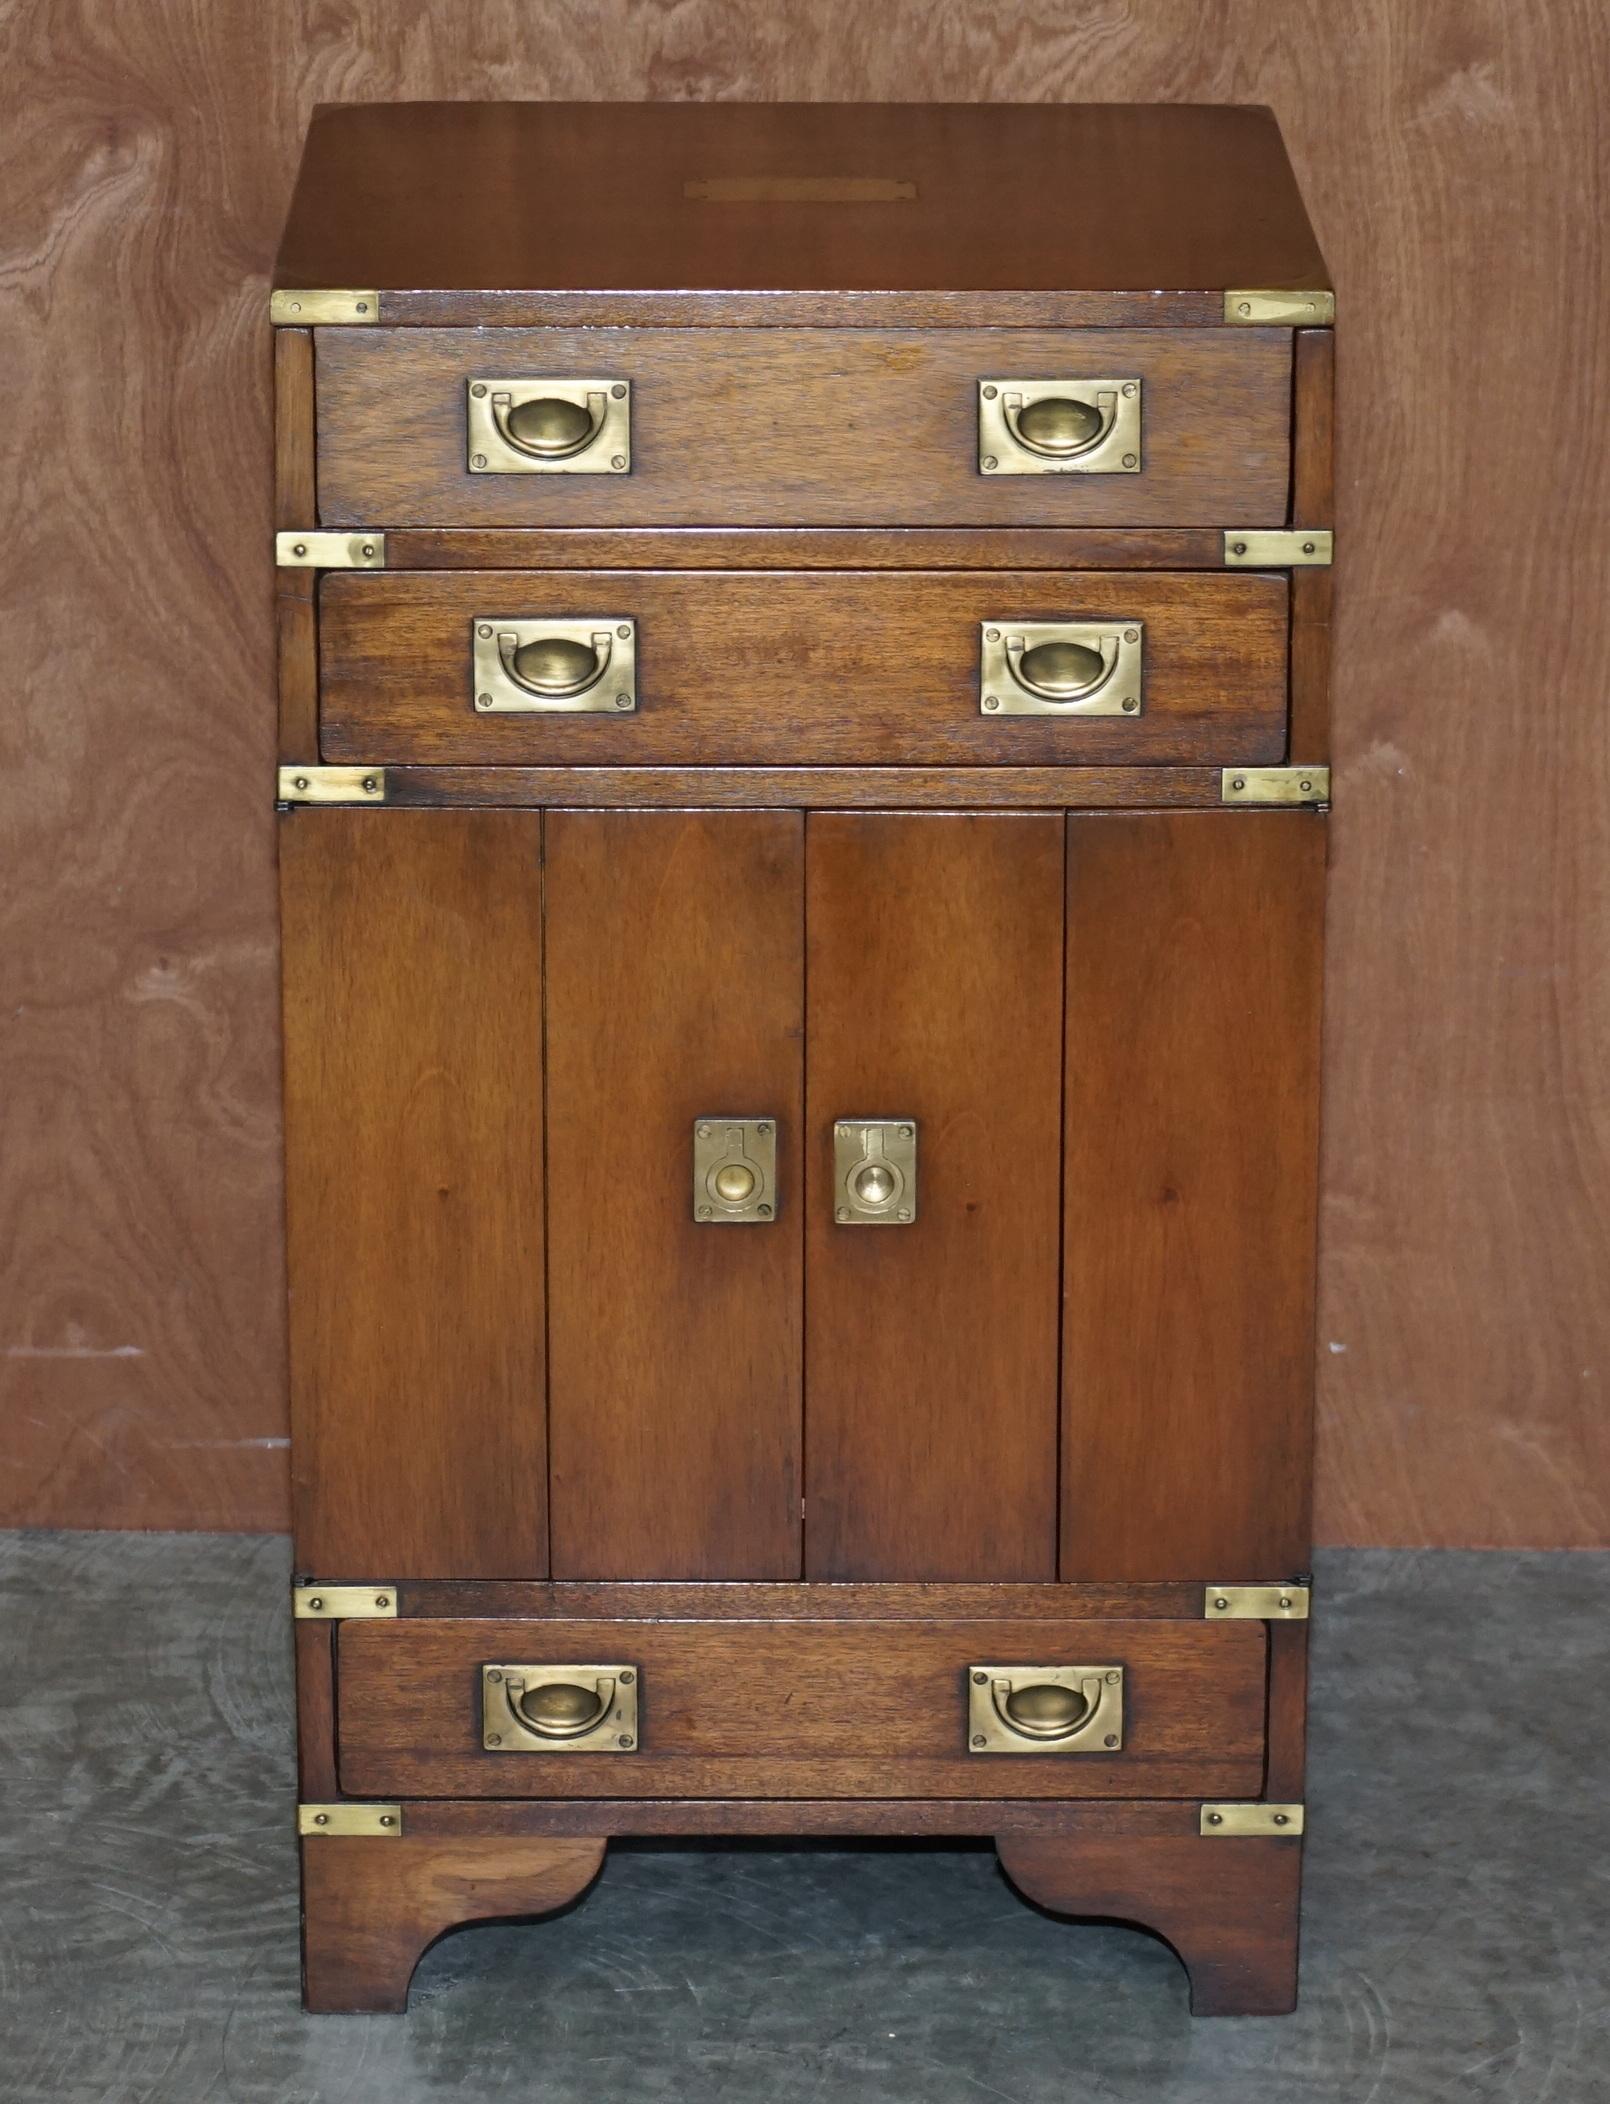 We are delighted to offer for sale this original Harrods London R.E.H Kennedy Furniture Record Player cupboard in solid mahogany with brass detailing made in the Military Campaign style 

A very well made and decorative piece of metamorphic